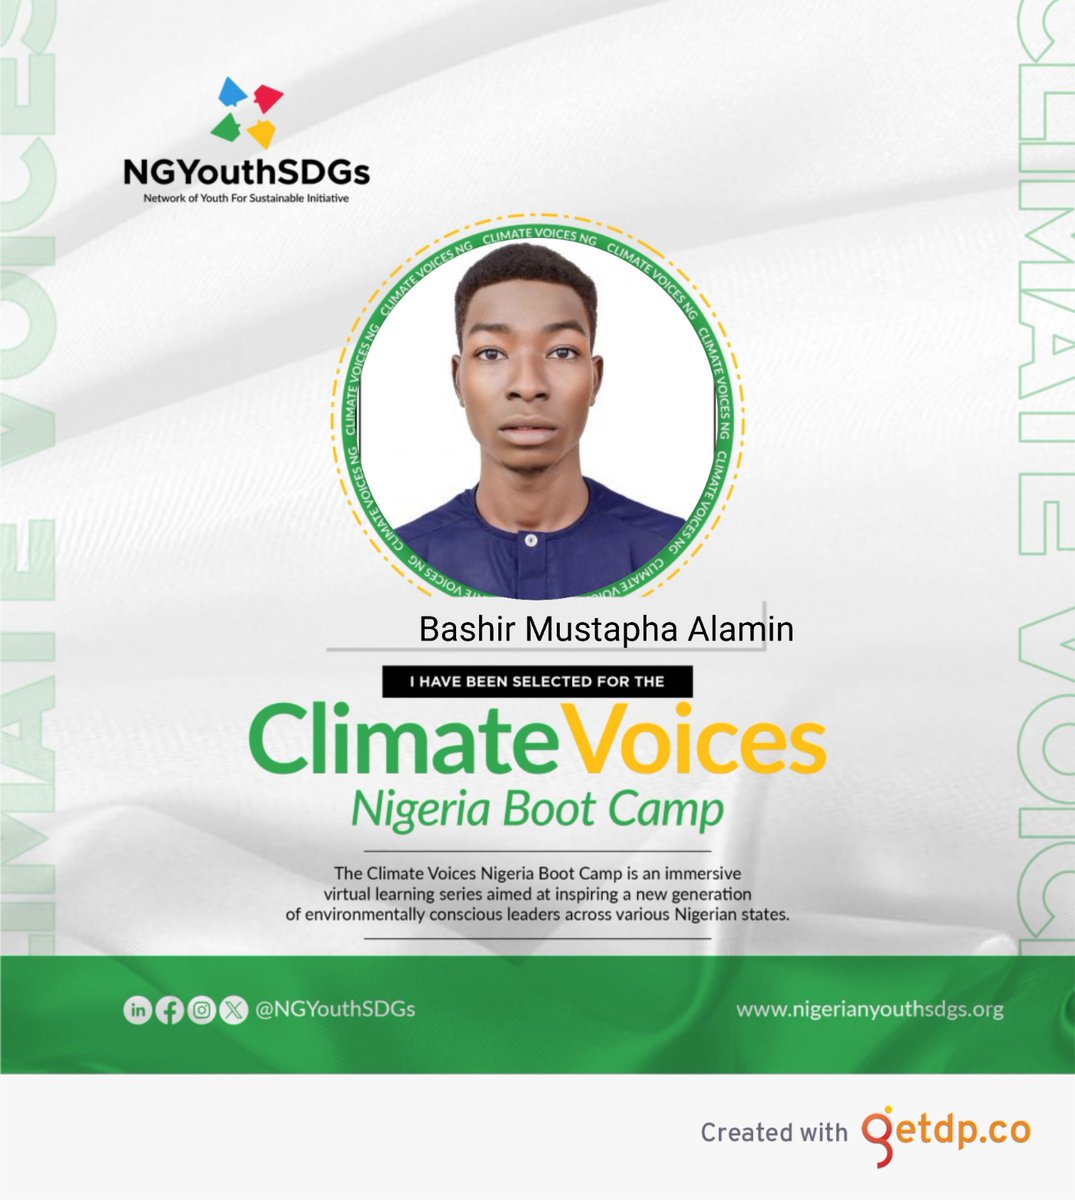 Thank You Climate Voices Nigeria Boot Camp Team,

I'm Very Delightful And Indulgence To Share That I've Been Admitted To The Climate Voices Nigeria Boot Camp!

@NGYouthSDGs

#ActionForClimate
#climateaction 
#sustainability 
#climatechange
#climatevoicesng